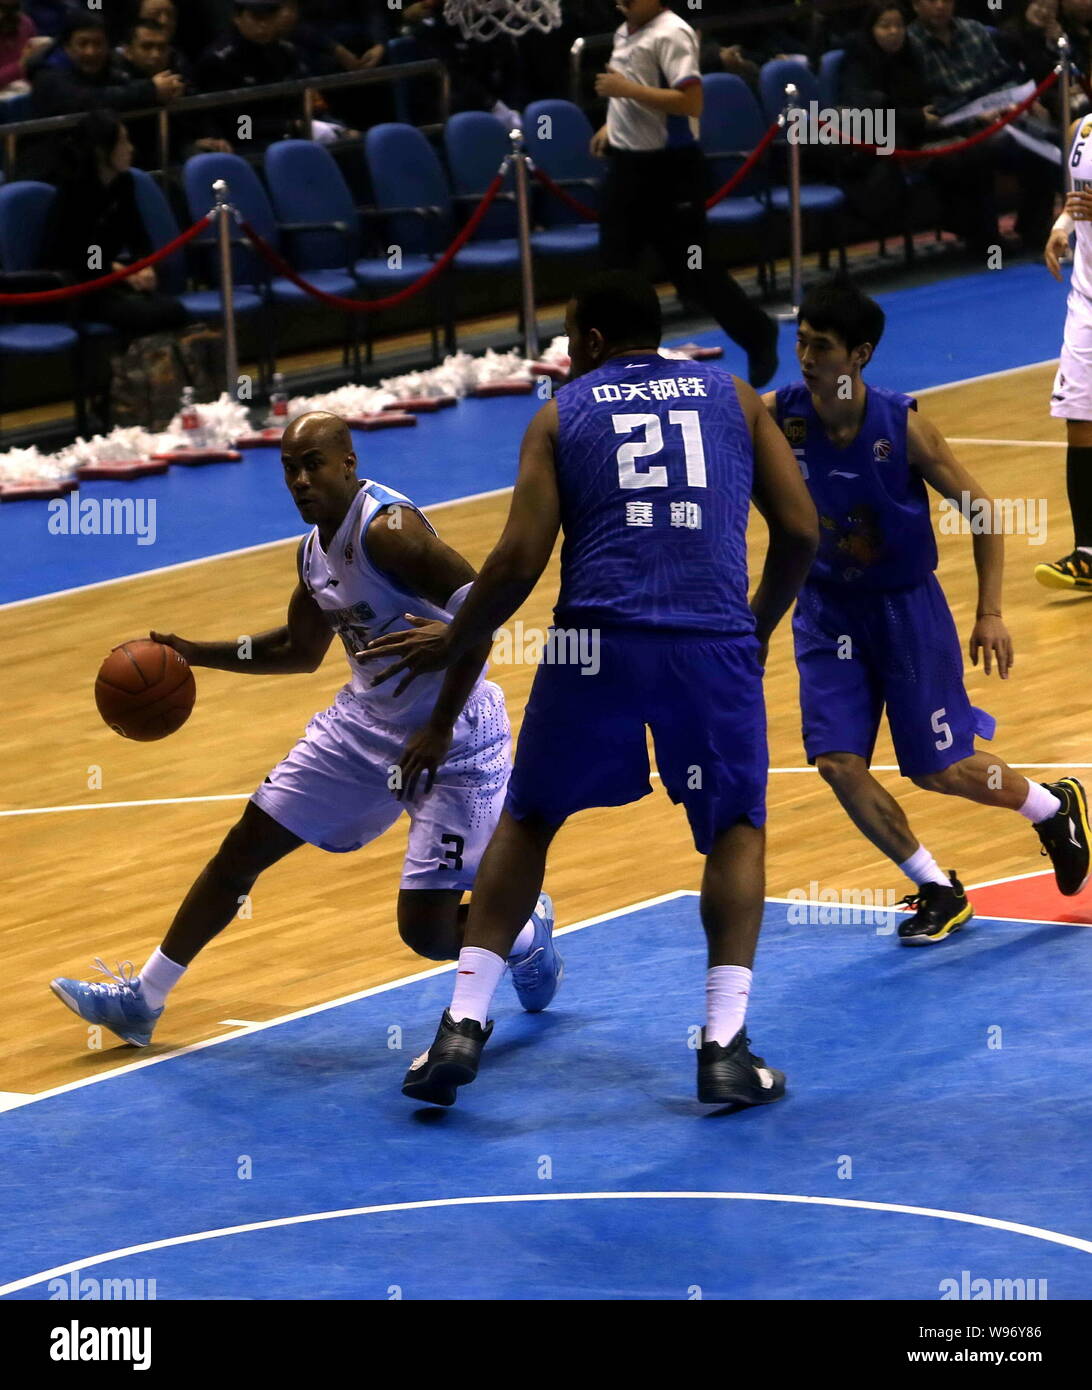 Stephon Marbury of the Beijing Ducks, left, challenges Garret Siler of the Jiangsu Dragons in their 11th round match during the 2012/2013 CBA season i Stock Photo